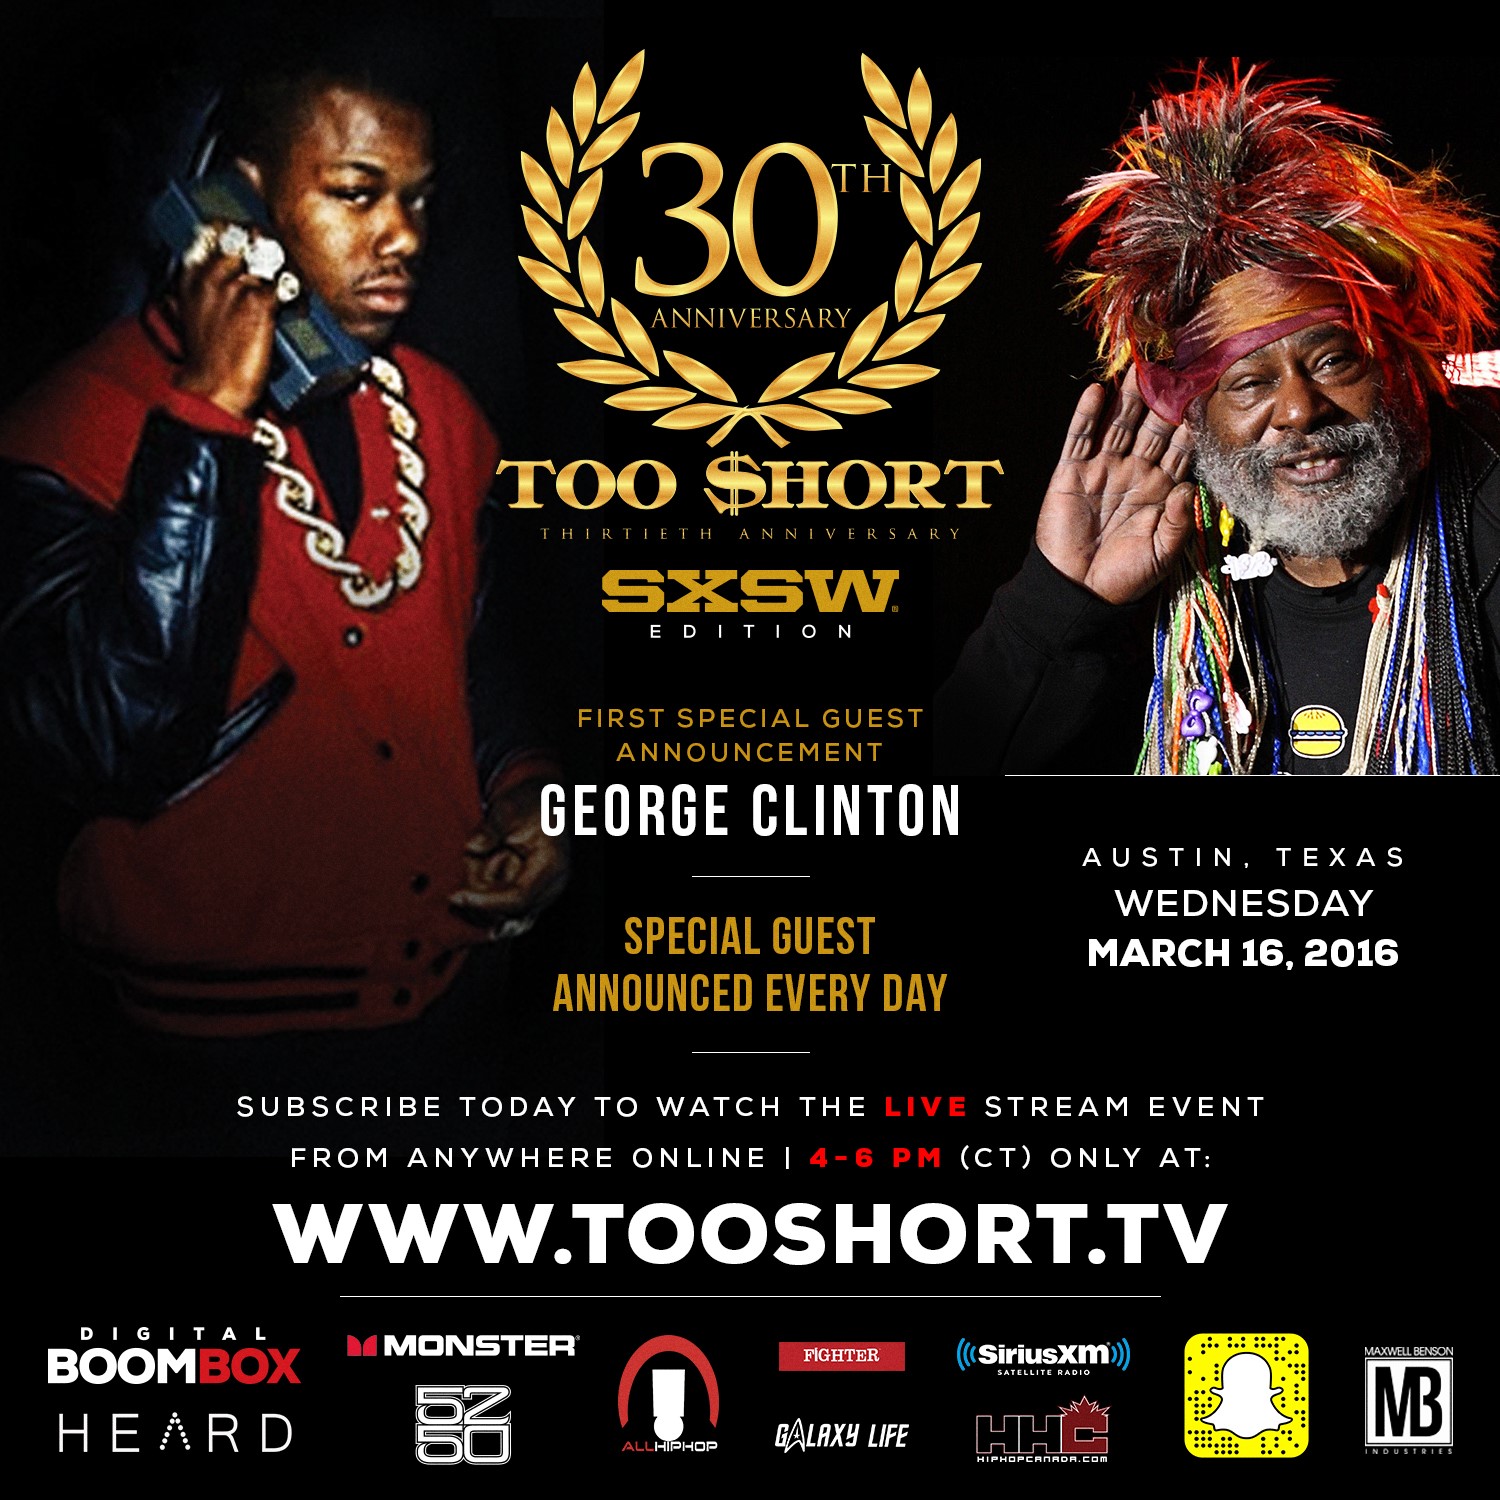 Too Short and George Clinton